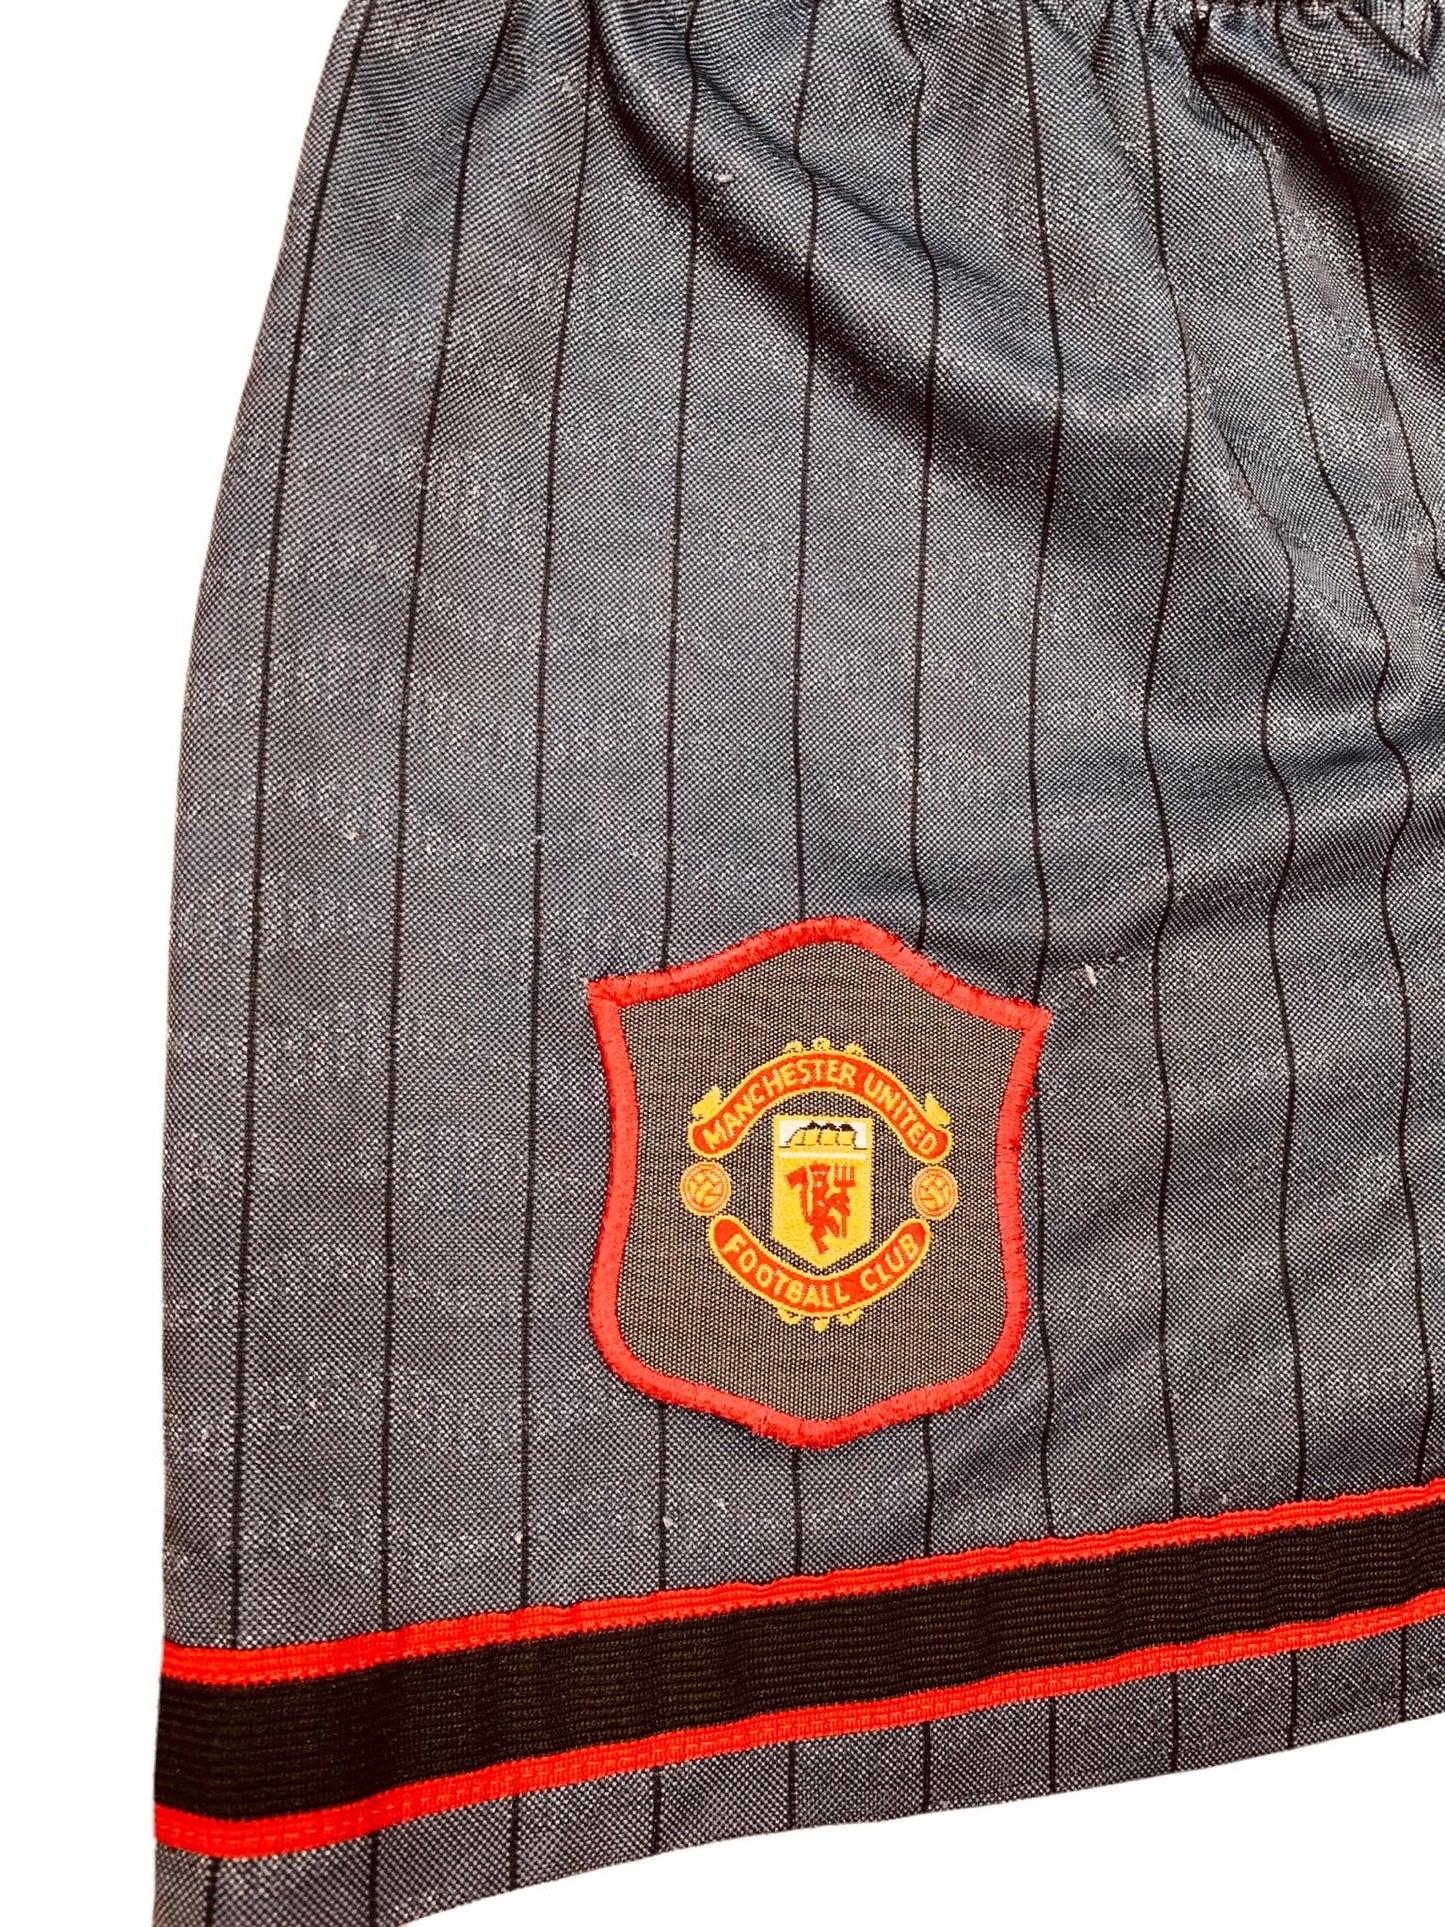 Manchester United 1995/96 Away 'Invisible' Shorts (XS)